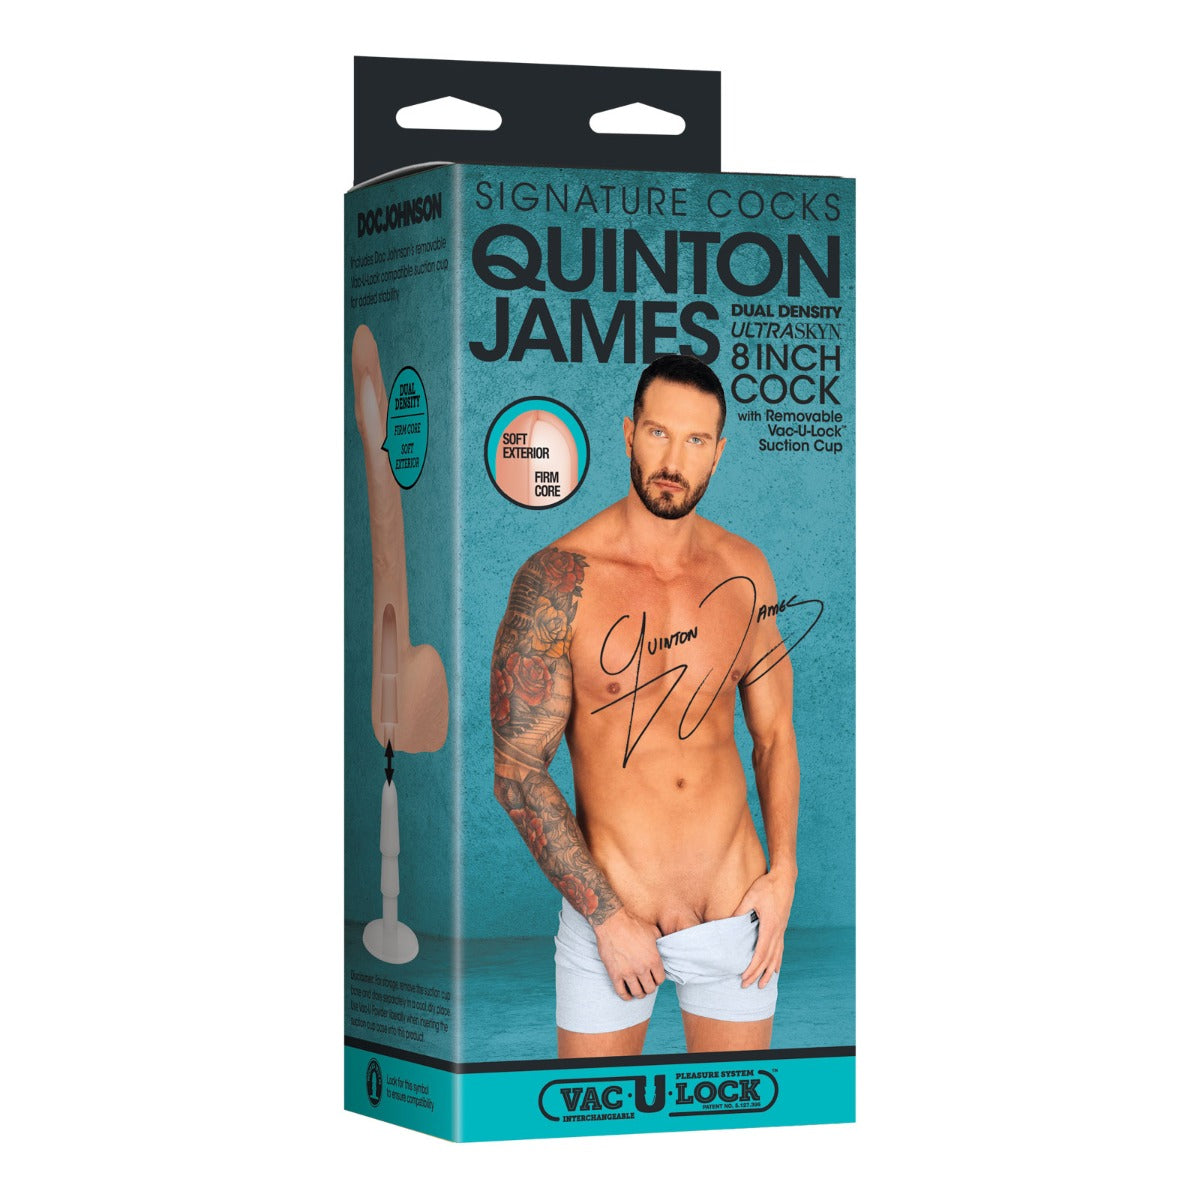 Suction Base Dildos Signature Cocks - Quinton James - 8 Inch ULTRASKYN Cock with Removable Vac-U-Lock Suction Cup   